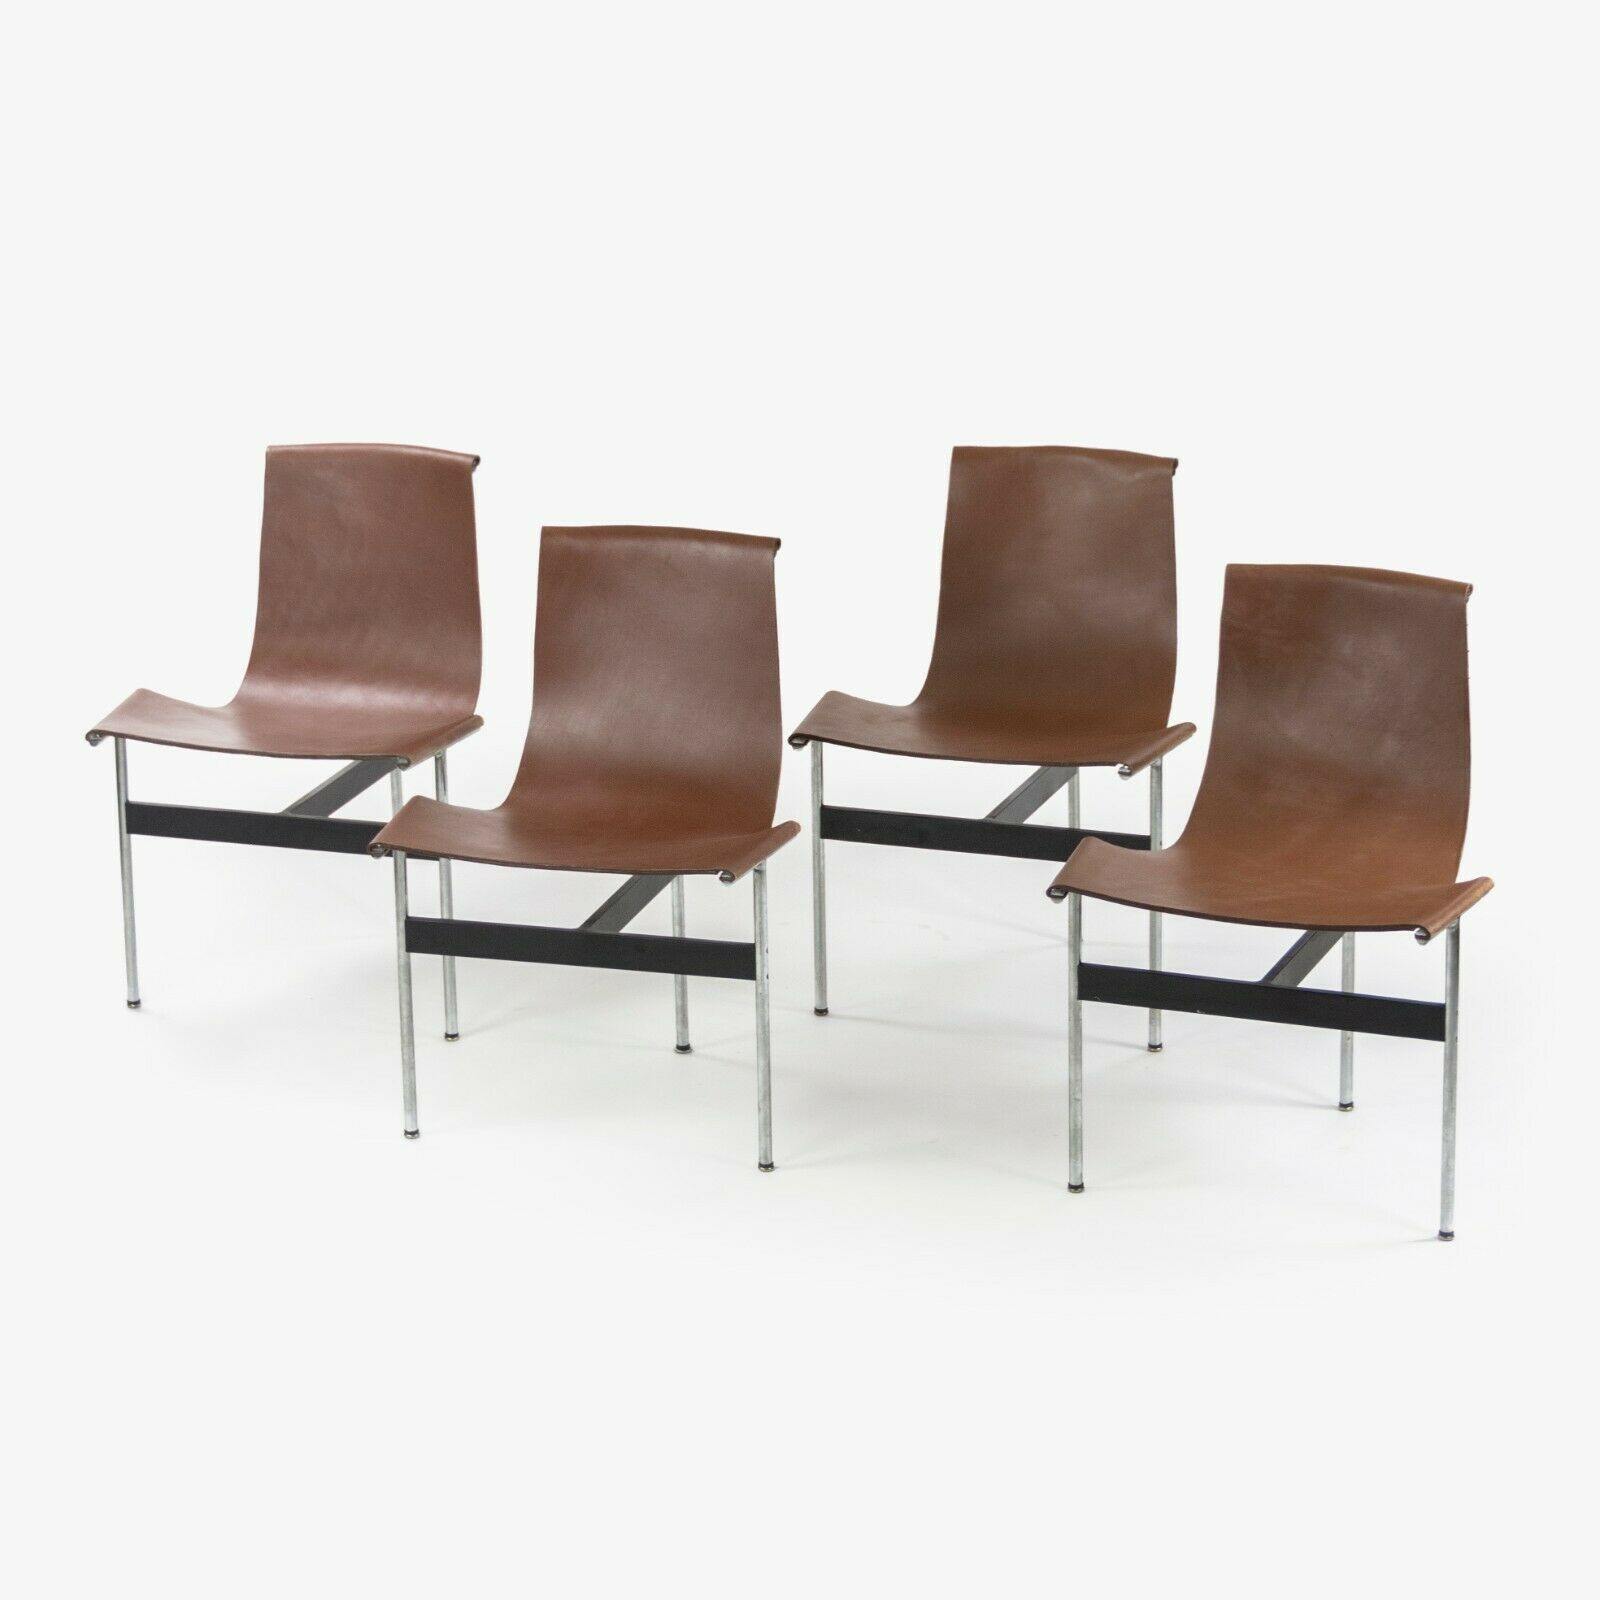 T Chairs (Set of 4)